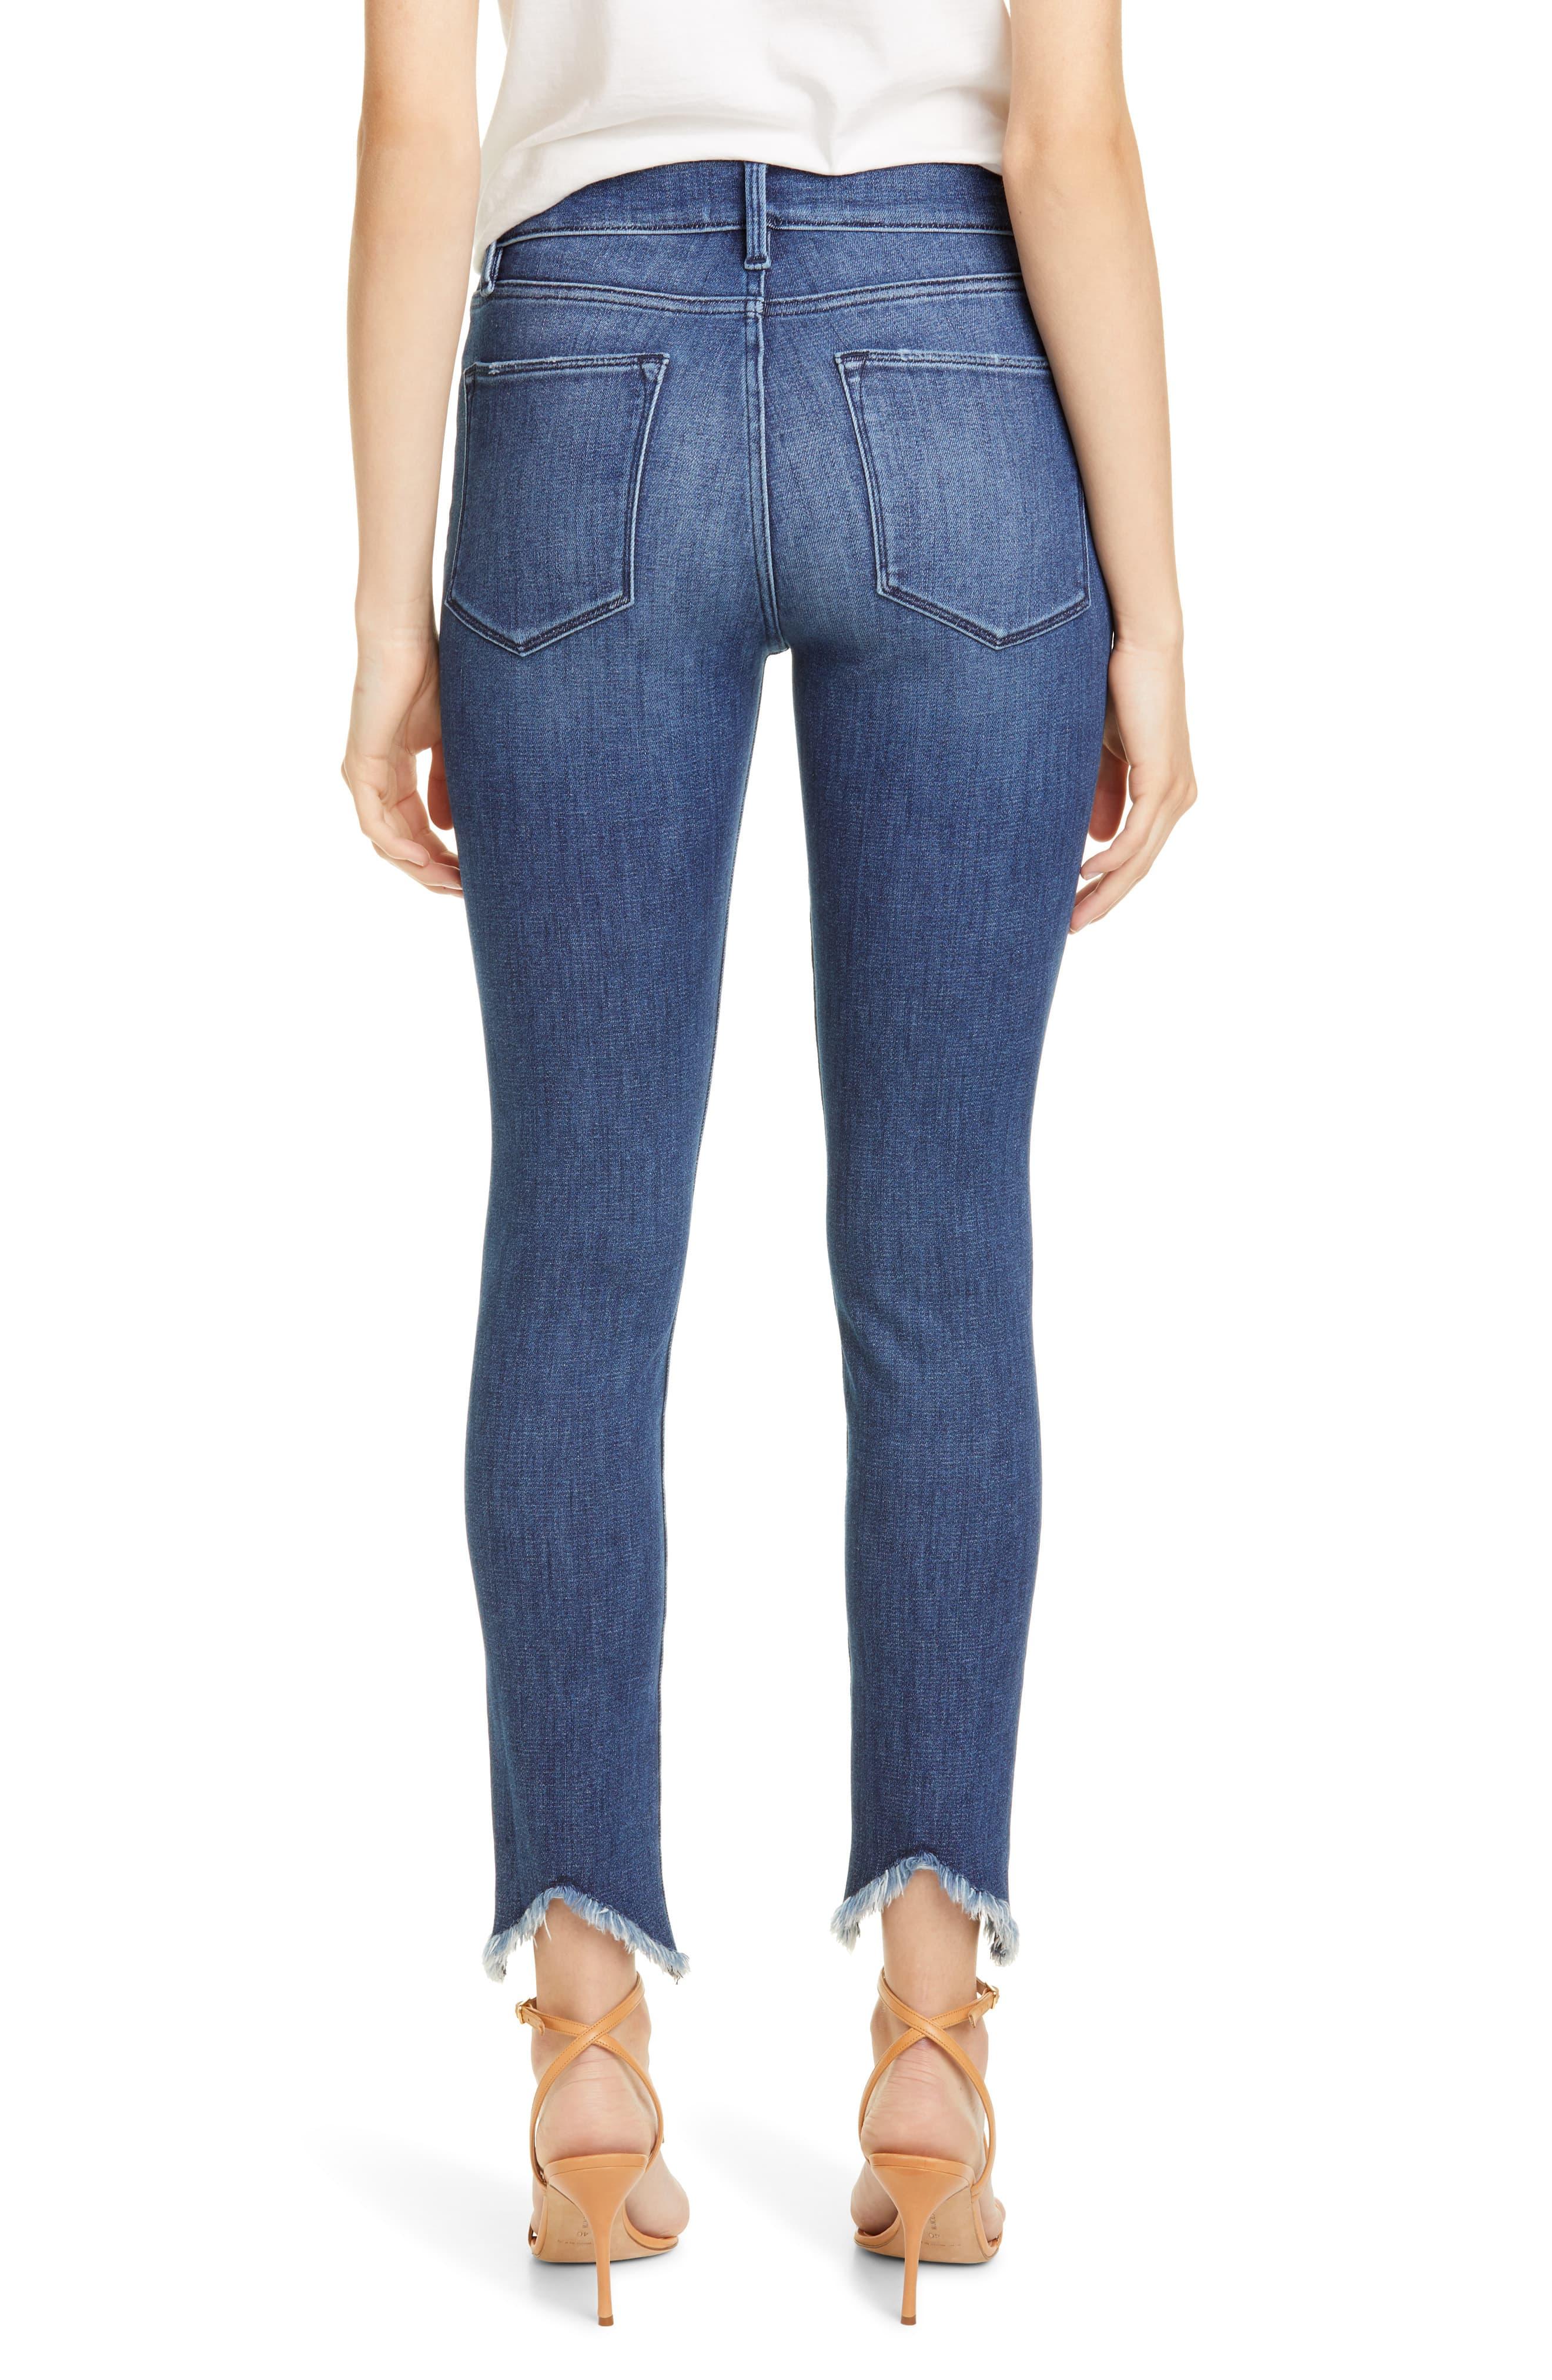 FRAME Le High Double Triangle Raw Hem Ankle Skinny Jeans in Blue - Lyst